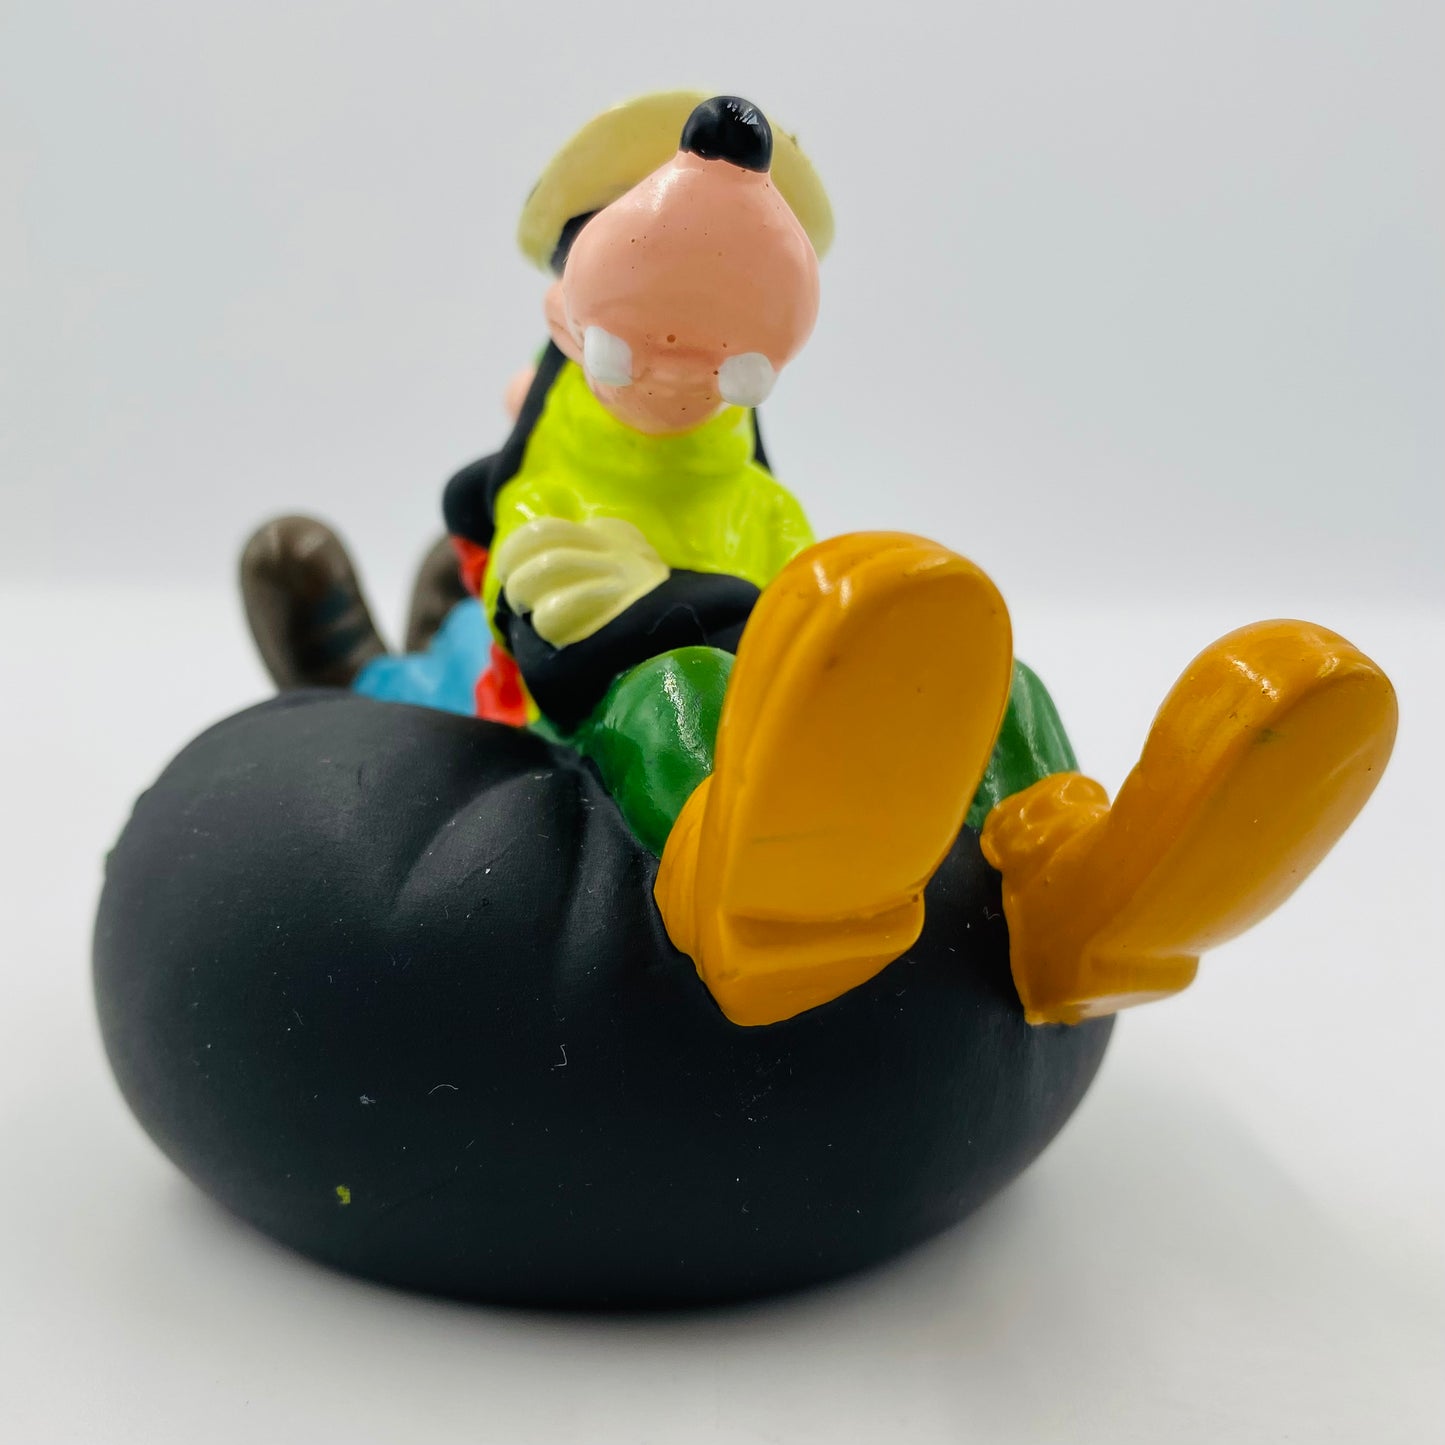 A Goofy Movie Goofy and Max in Water Raft-Squirter Burger King Kids' Meal toy (1995) loose